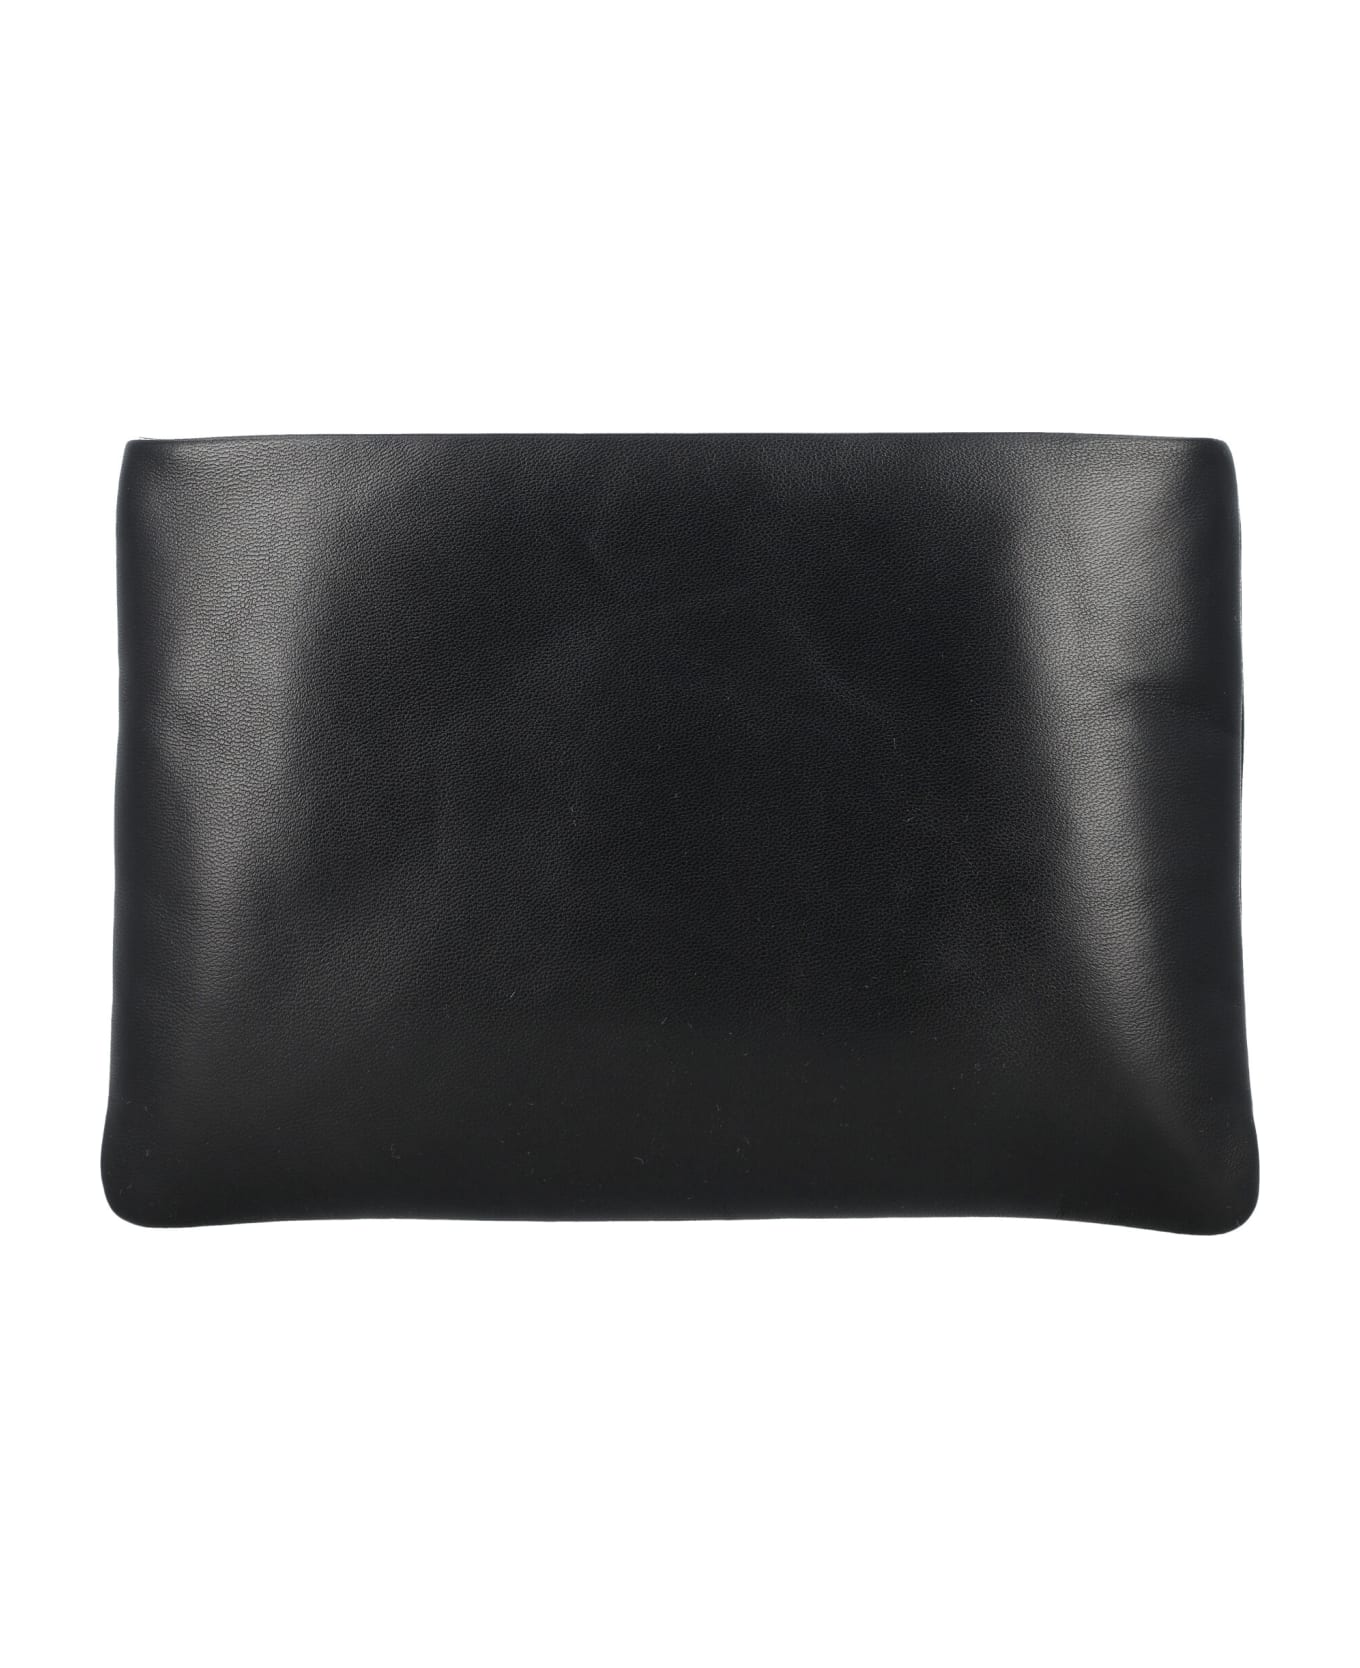 Saint Laurent Padded Leather Clutch Bag With Logo - BLACK バッグ